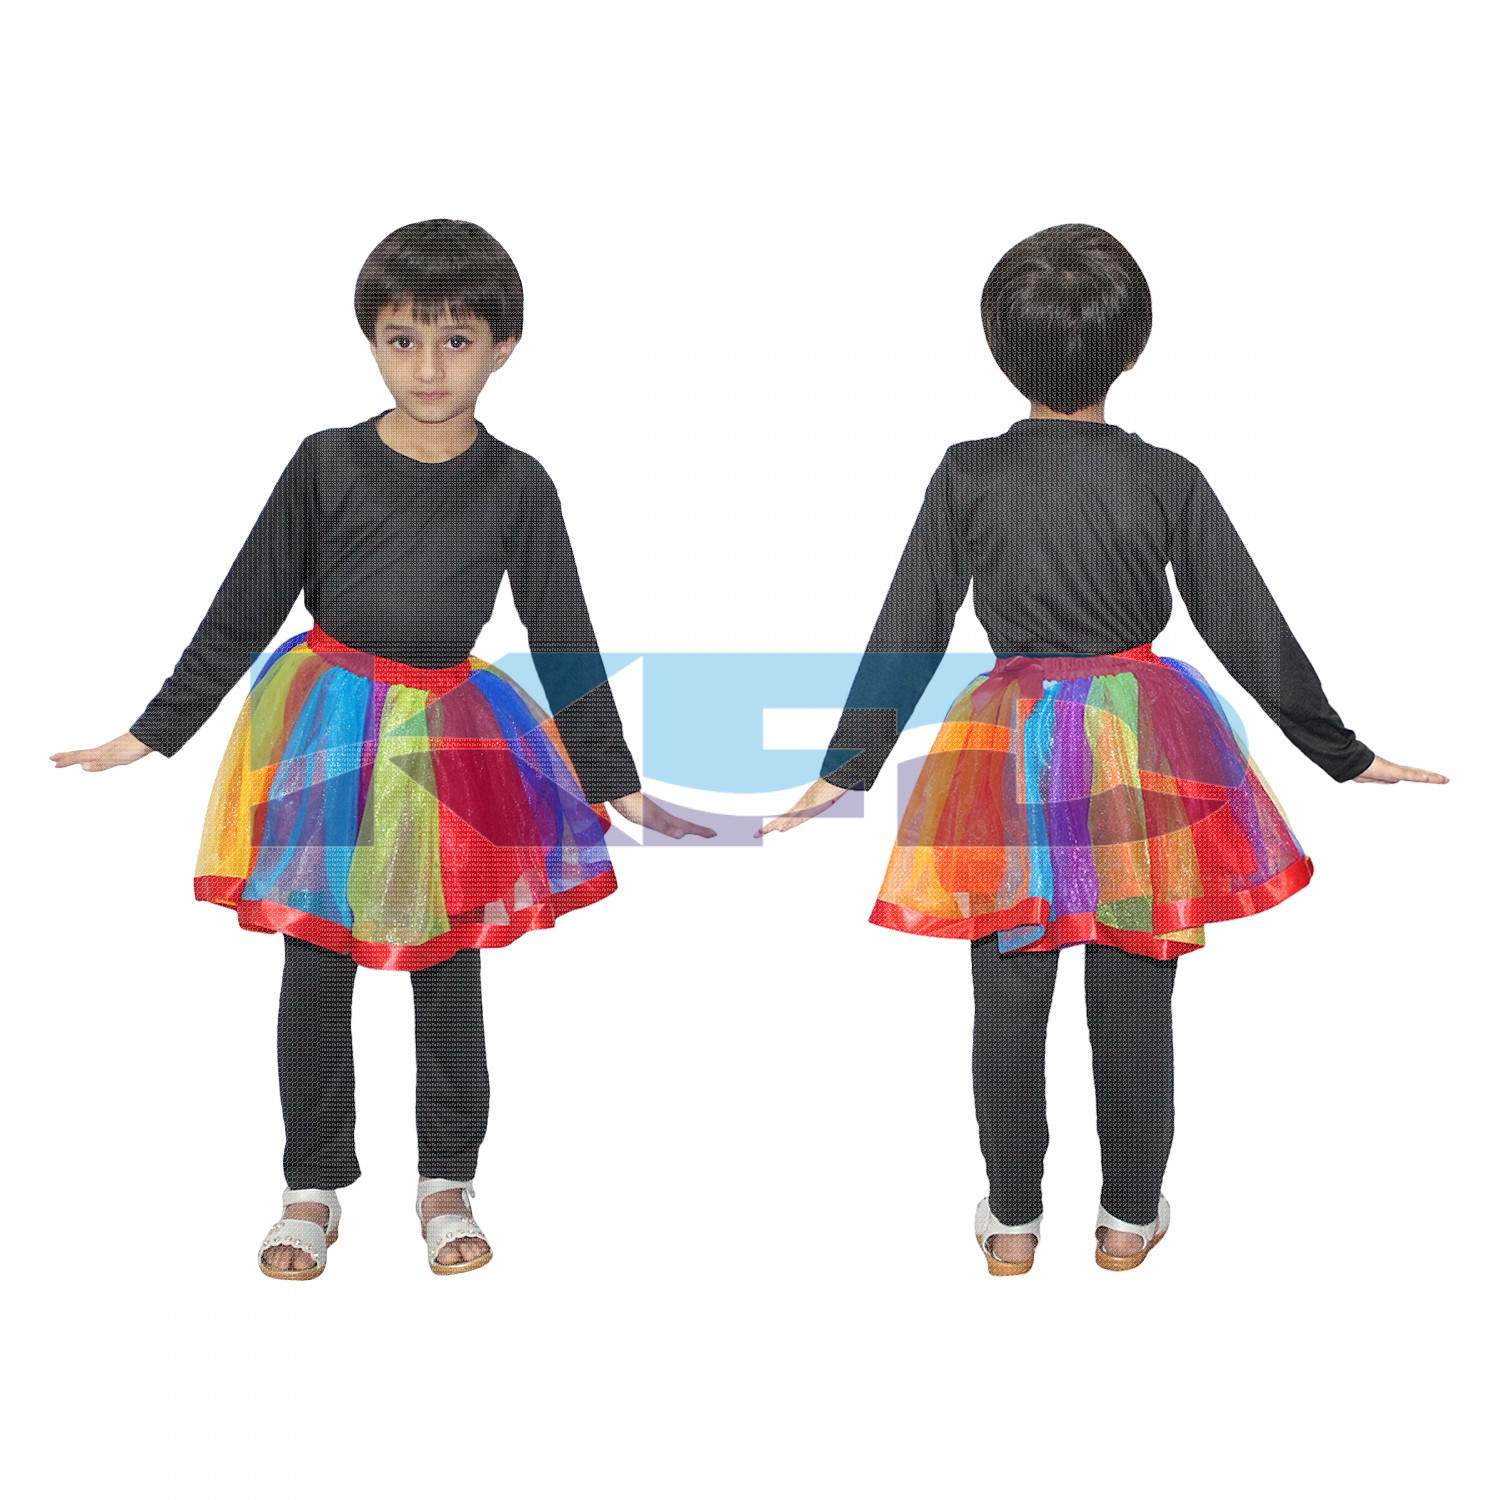 Rainbow Tu Tu Skirt/Summer Fluffy/Tulle Skirt For kids/Tutus Dancing Pettiskirt/Fancy Dress competitions/School Annual functions/ Birthday B'day Parties